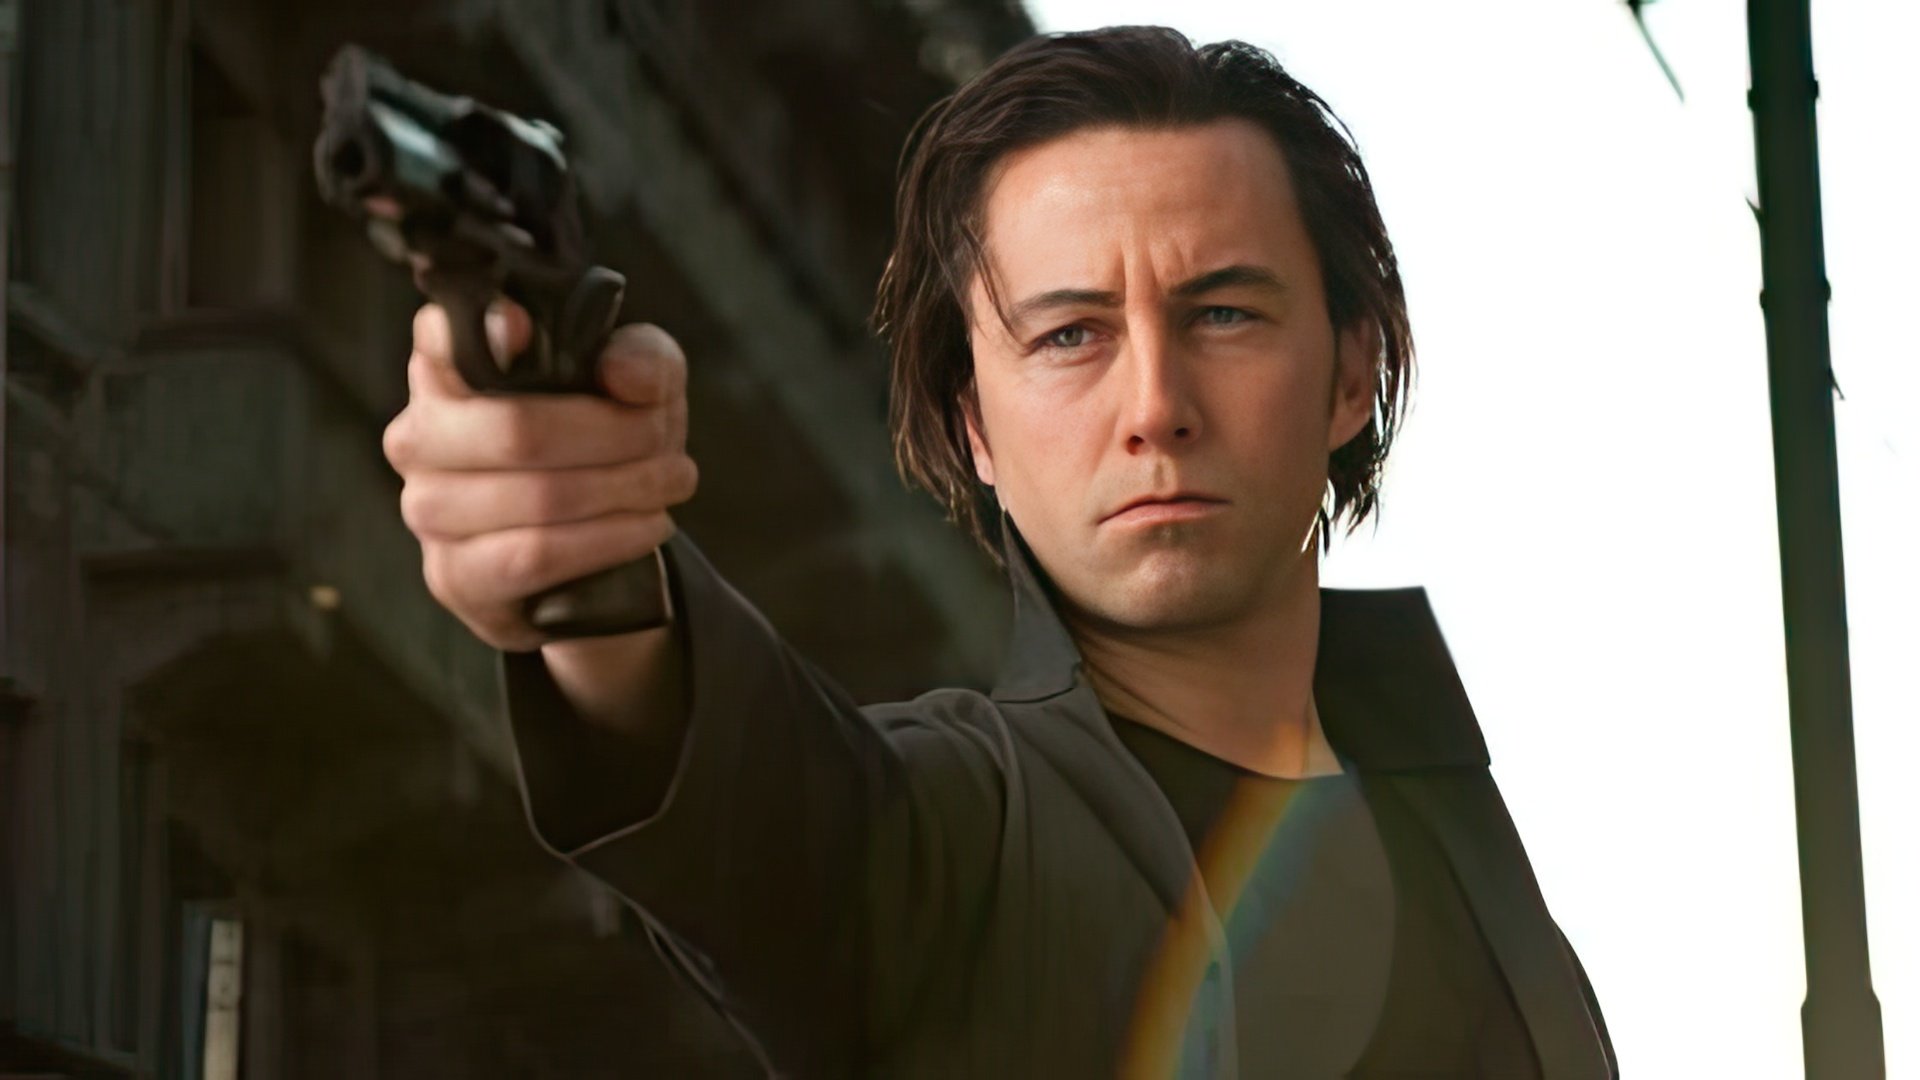 A frame from the movie 'Looper'